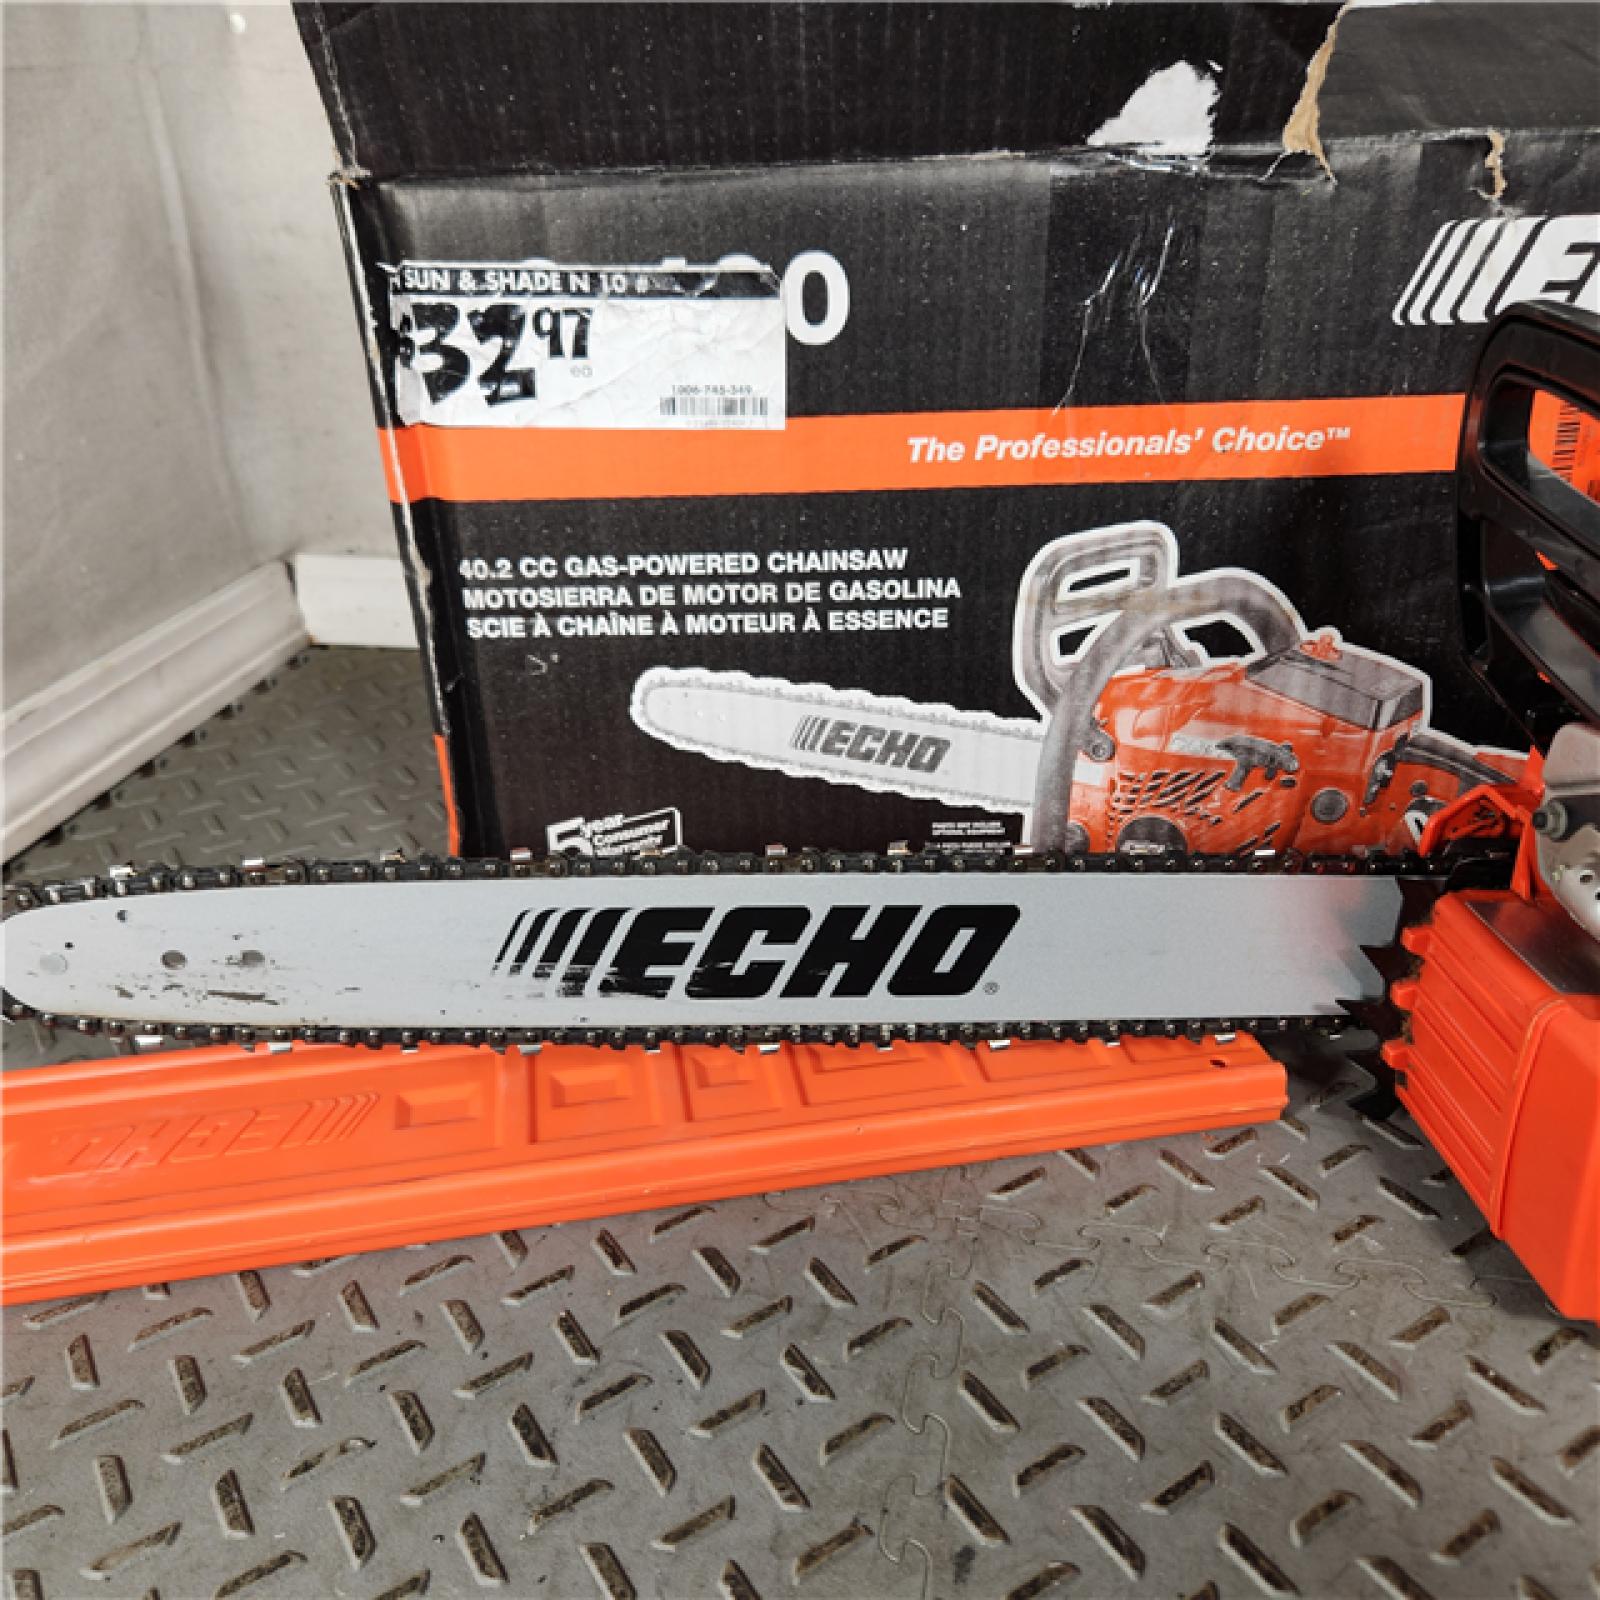 Houston Location - AS-IS ECHO 18 in. 40.2 Cc Gas 2-Stroke Rear Handle Chainsaw - Appears IN GOOD Condition